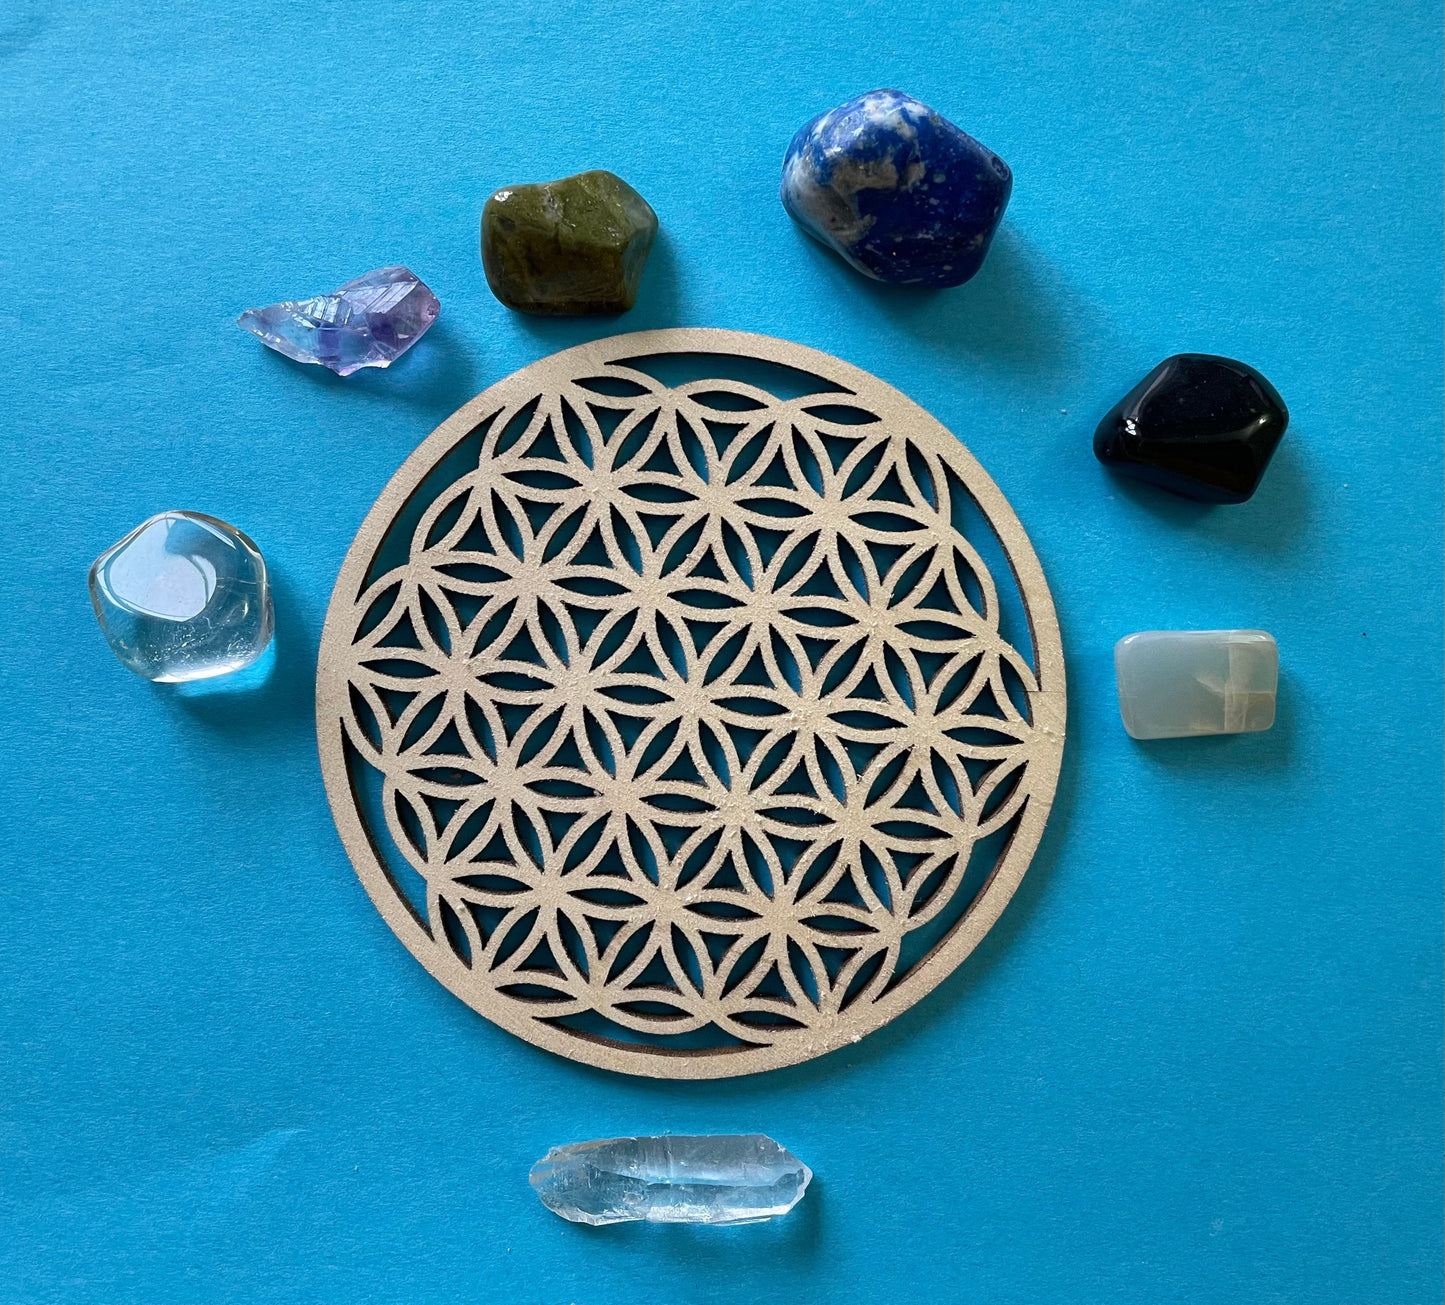 8 piece psychic empowerment healing crystal set with flower of life grid perfect for stocking stuffers